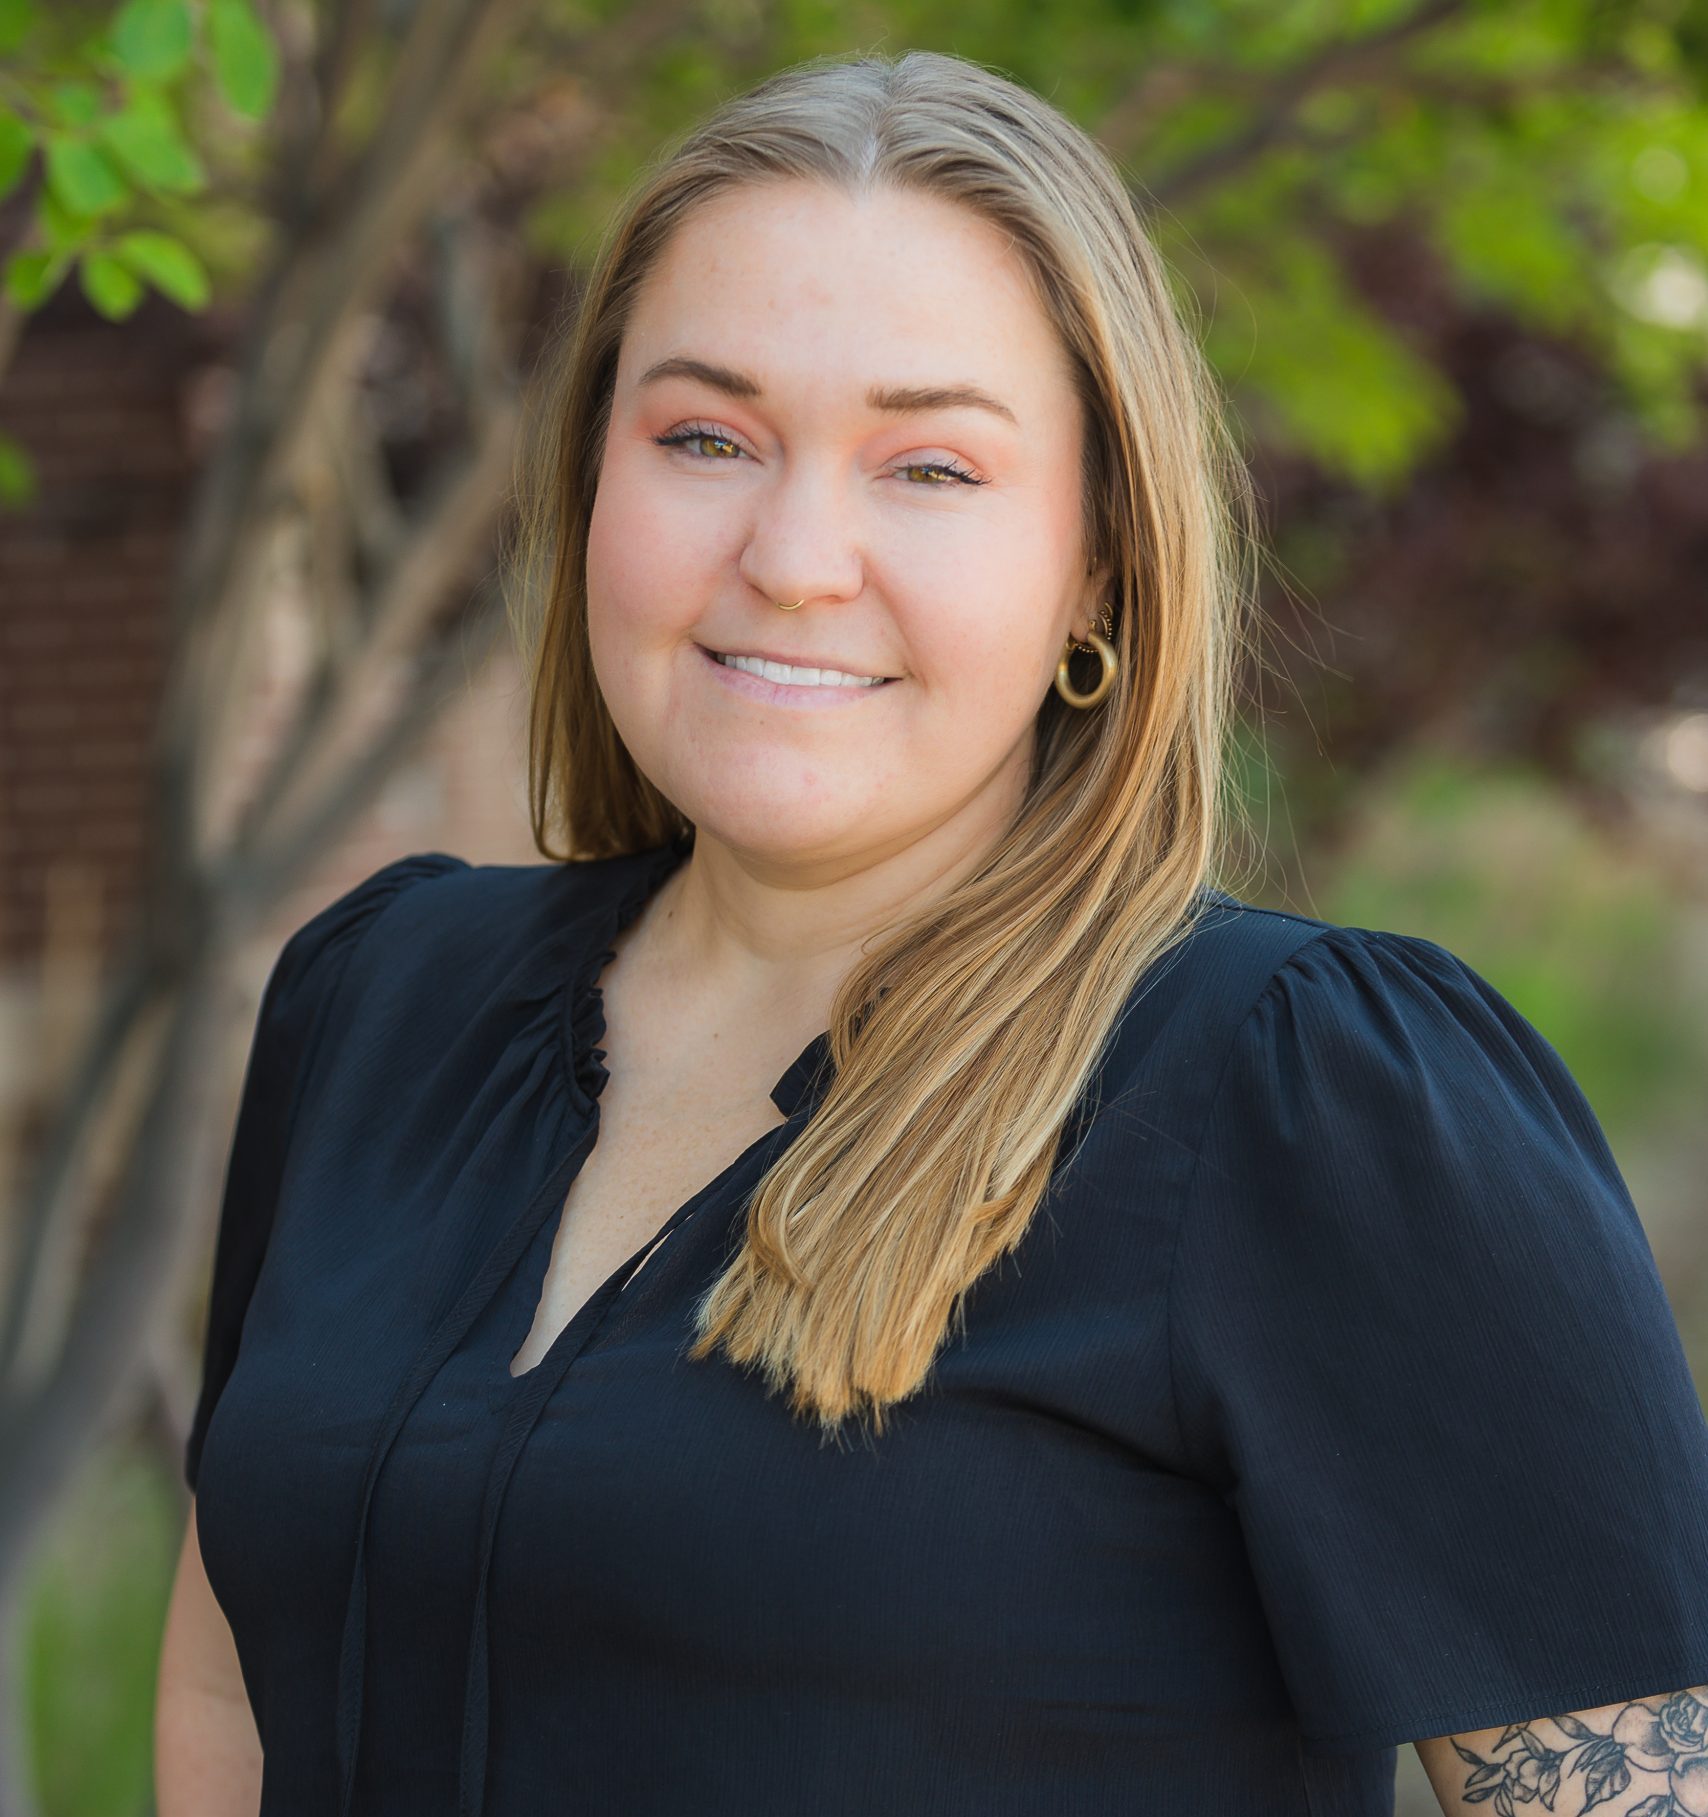 Ashley Howell, a Psychiatric Nurse Practitioner (PMHNP) and military veteran, discusses military mental health and her personal experiences transitioning to civilian life after discharge.